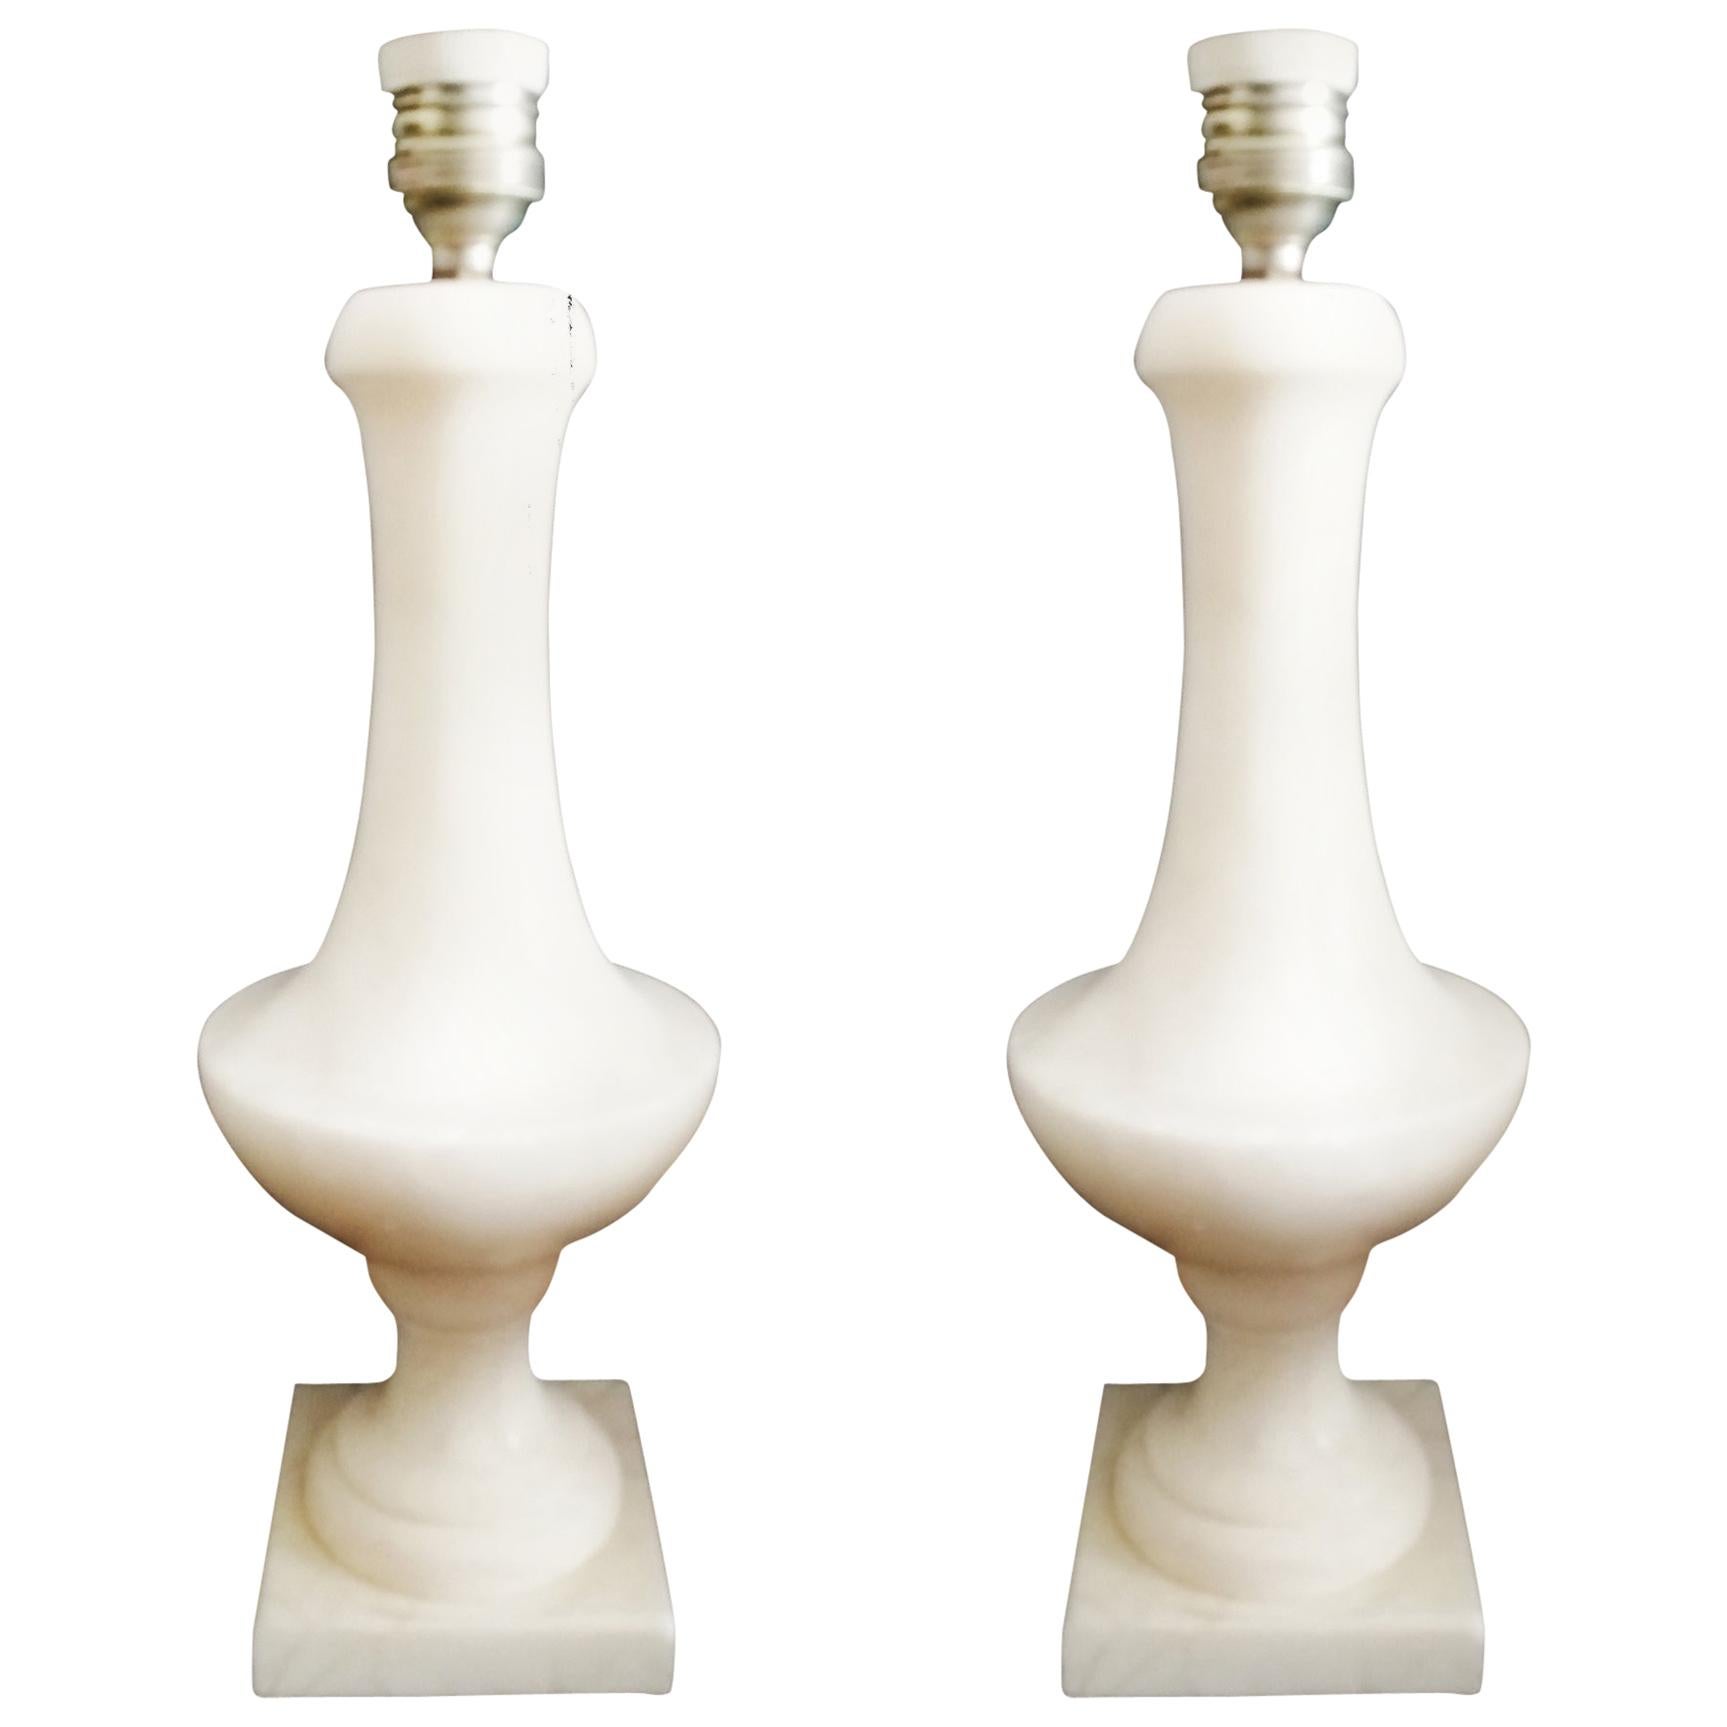 Pair of Whiter Alabaster or marble Table Lamp, Italy, 1950s